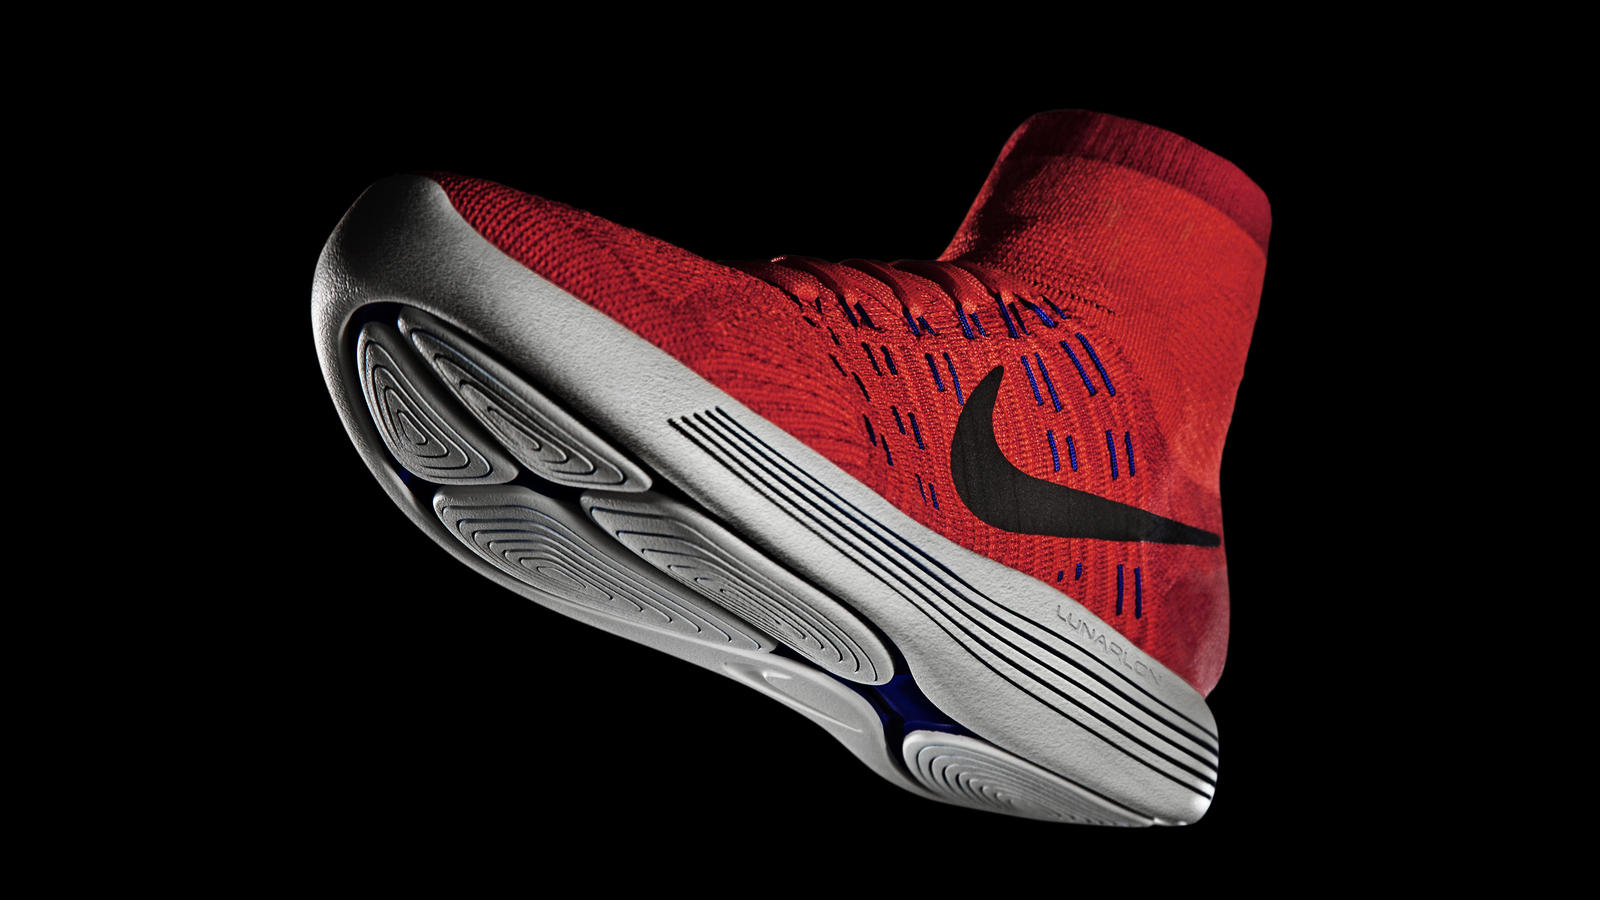 New LunarEpic Flyknit model features an innovative mid-height collar design and a new tooling system. © Nike 